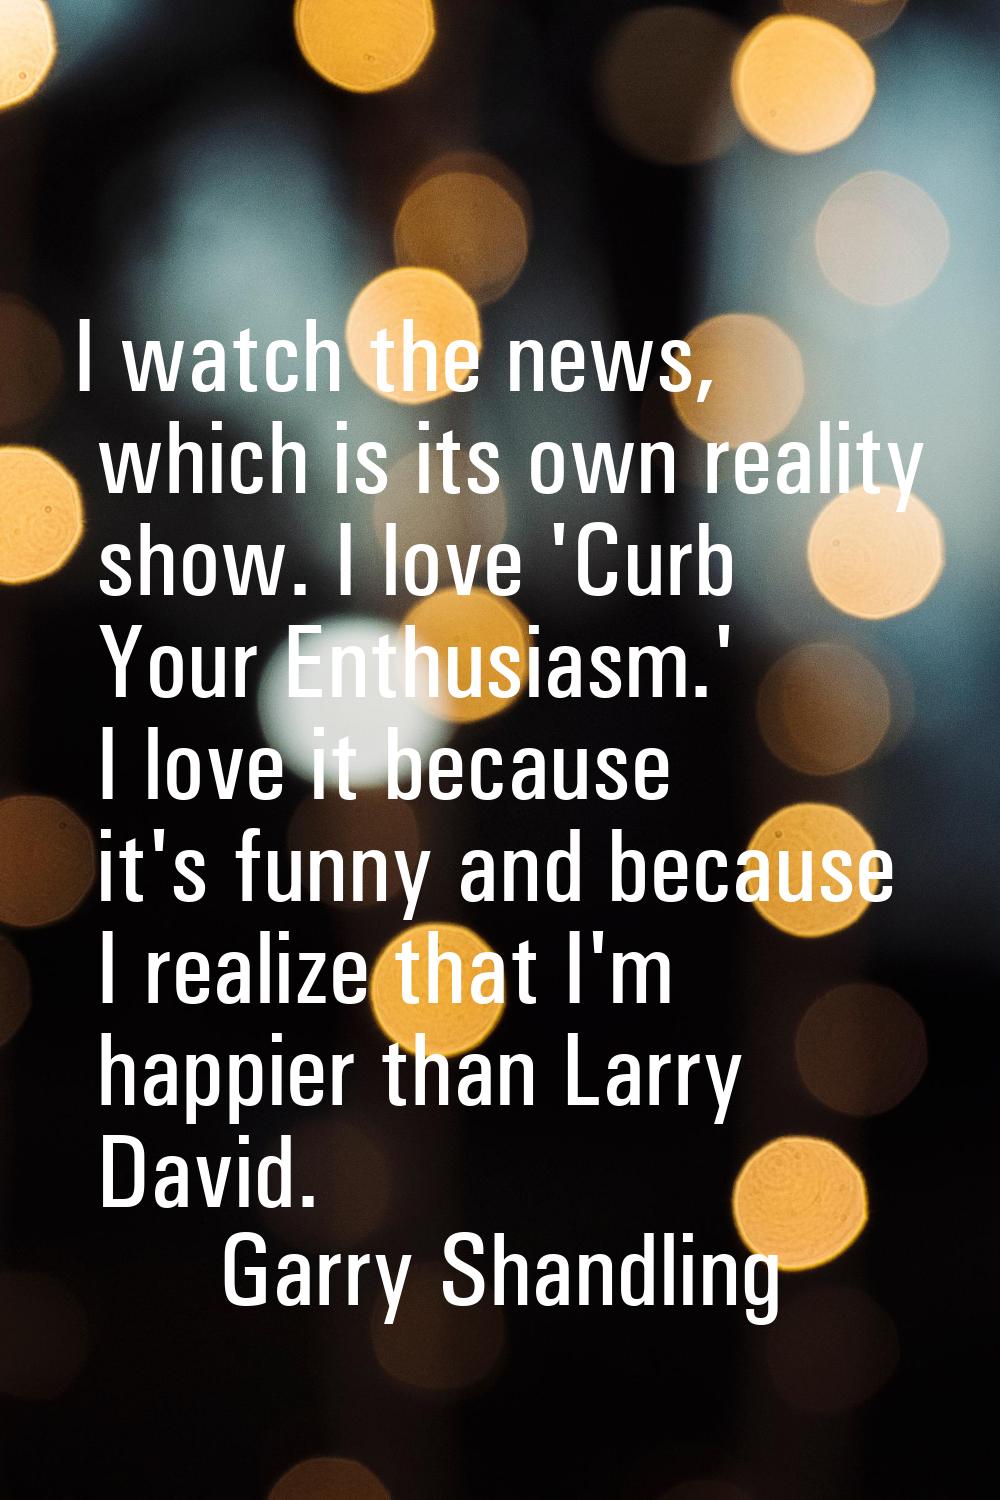 I watch the news, which is its own reality show. I love 'Curb Your Enthusiasm.' I love it because i